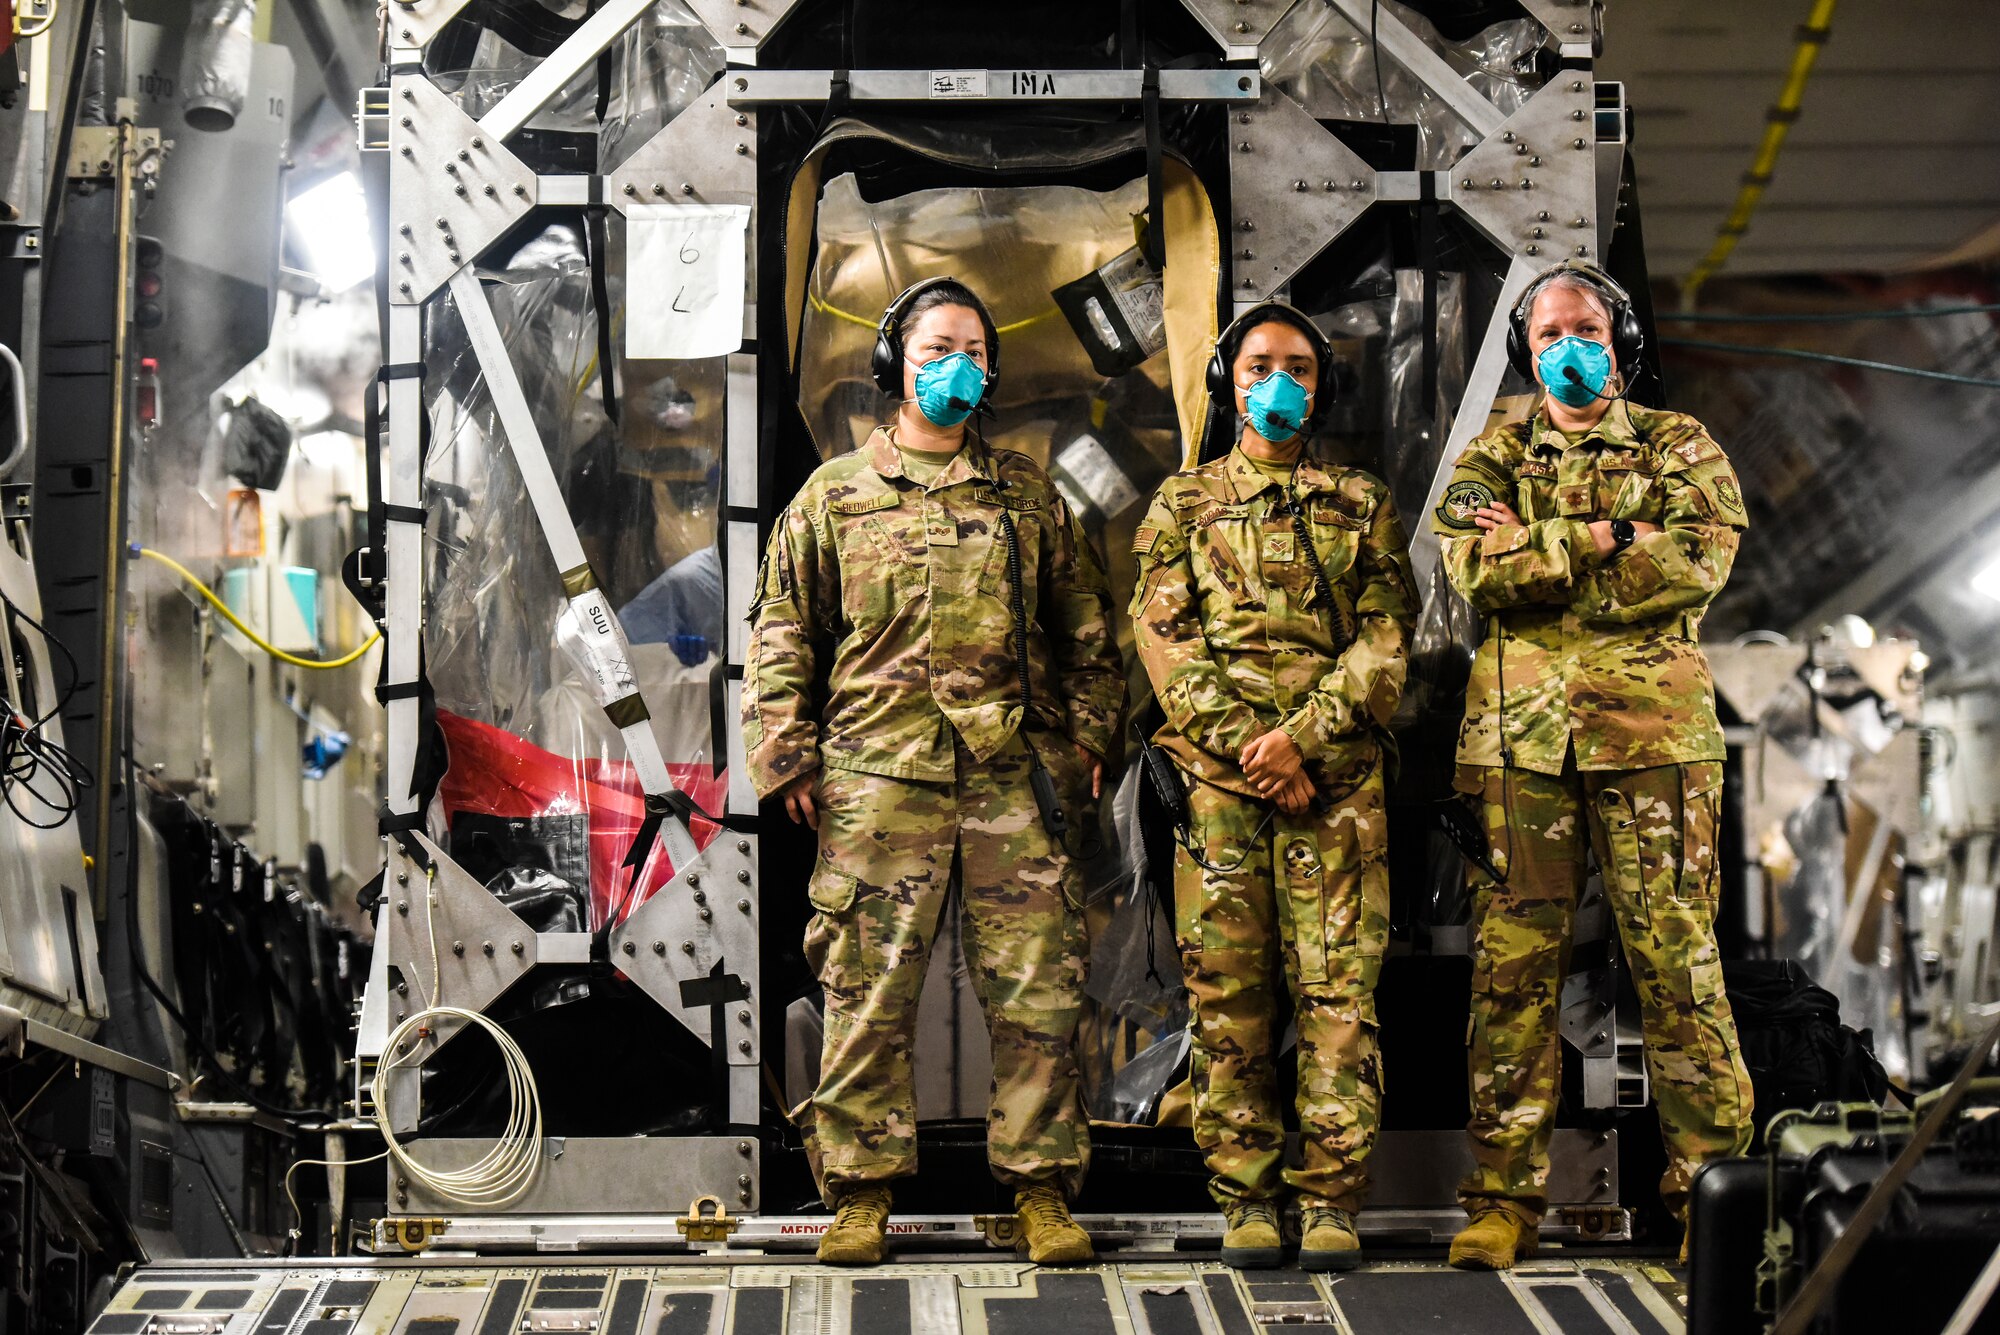 An Aeromedical Evacuation unit from Travis Air Force Base, California, support a Transport Isolation System operation at Joint Base Pearl-Harbor Hickam, Hawaii, July 17, 2020. A team of Airmen from several commands rapidly executed a Transport Isolation System in support of a COVID-19 bio-containment aeromedical evacuation mission. This is the first time the TIS was utilized in the Indo-Pacific area of operations. The TIS is an infectious disease containment unit designed to minimize contamination risk to aircrew and medical attendants, while allowing in-flight medical care for patients afflicted by a disease. (U.S. Air Force photo by Tech. Sgt. Anthony Nelson Jr.)